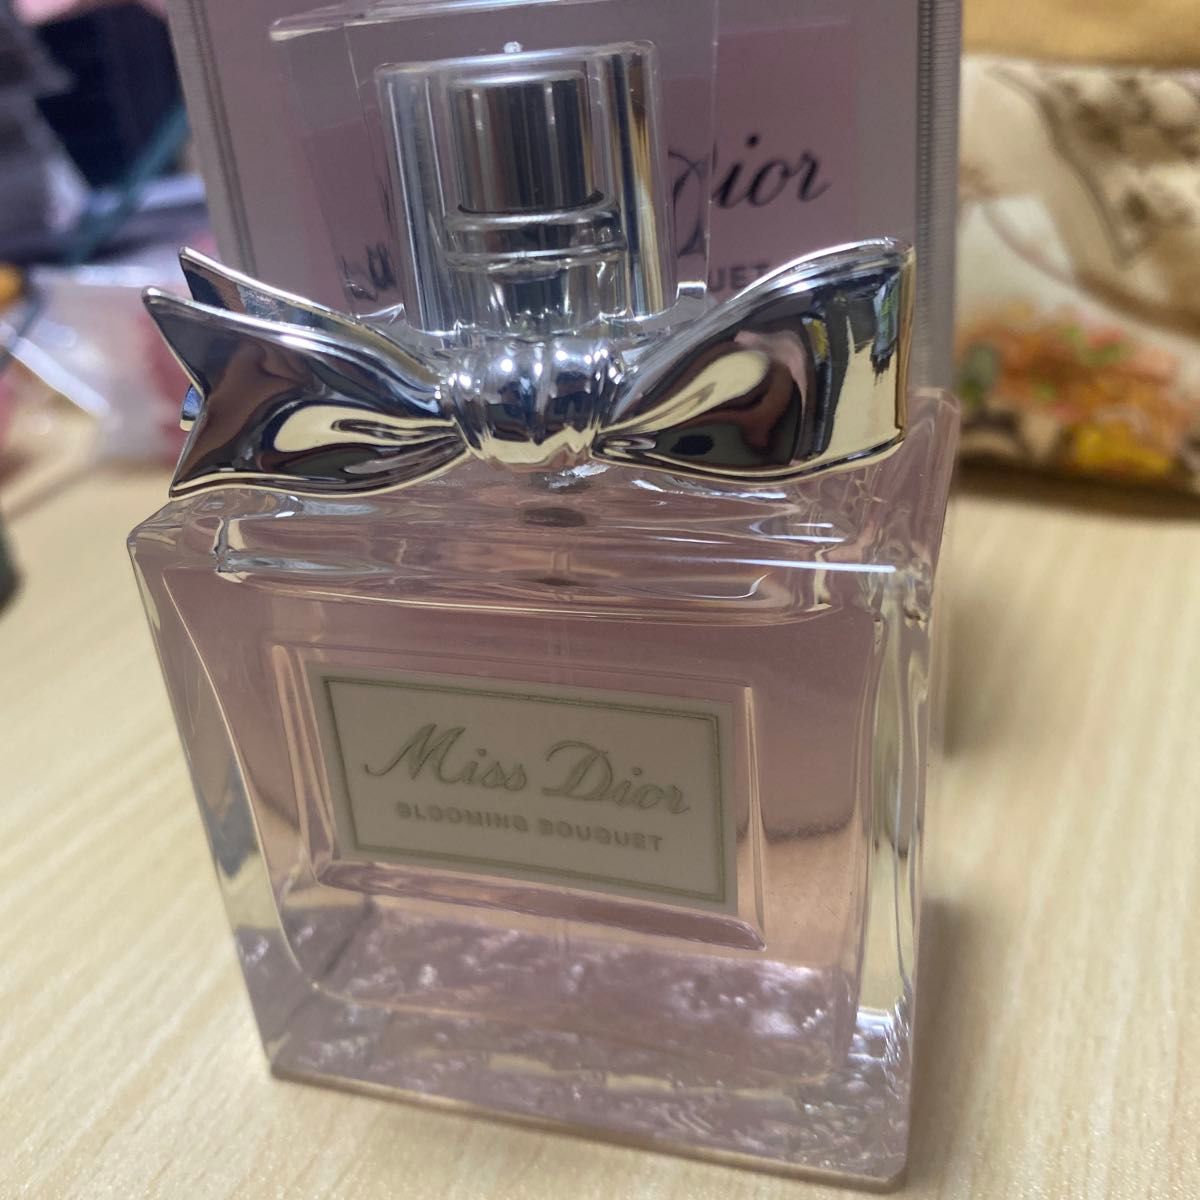 Miss Dior BLOOMING BOUQUET 50ml